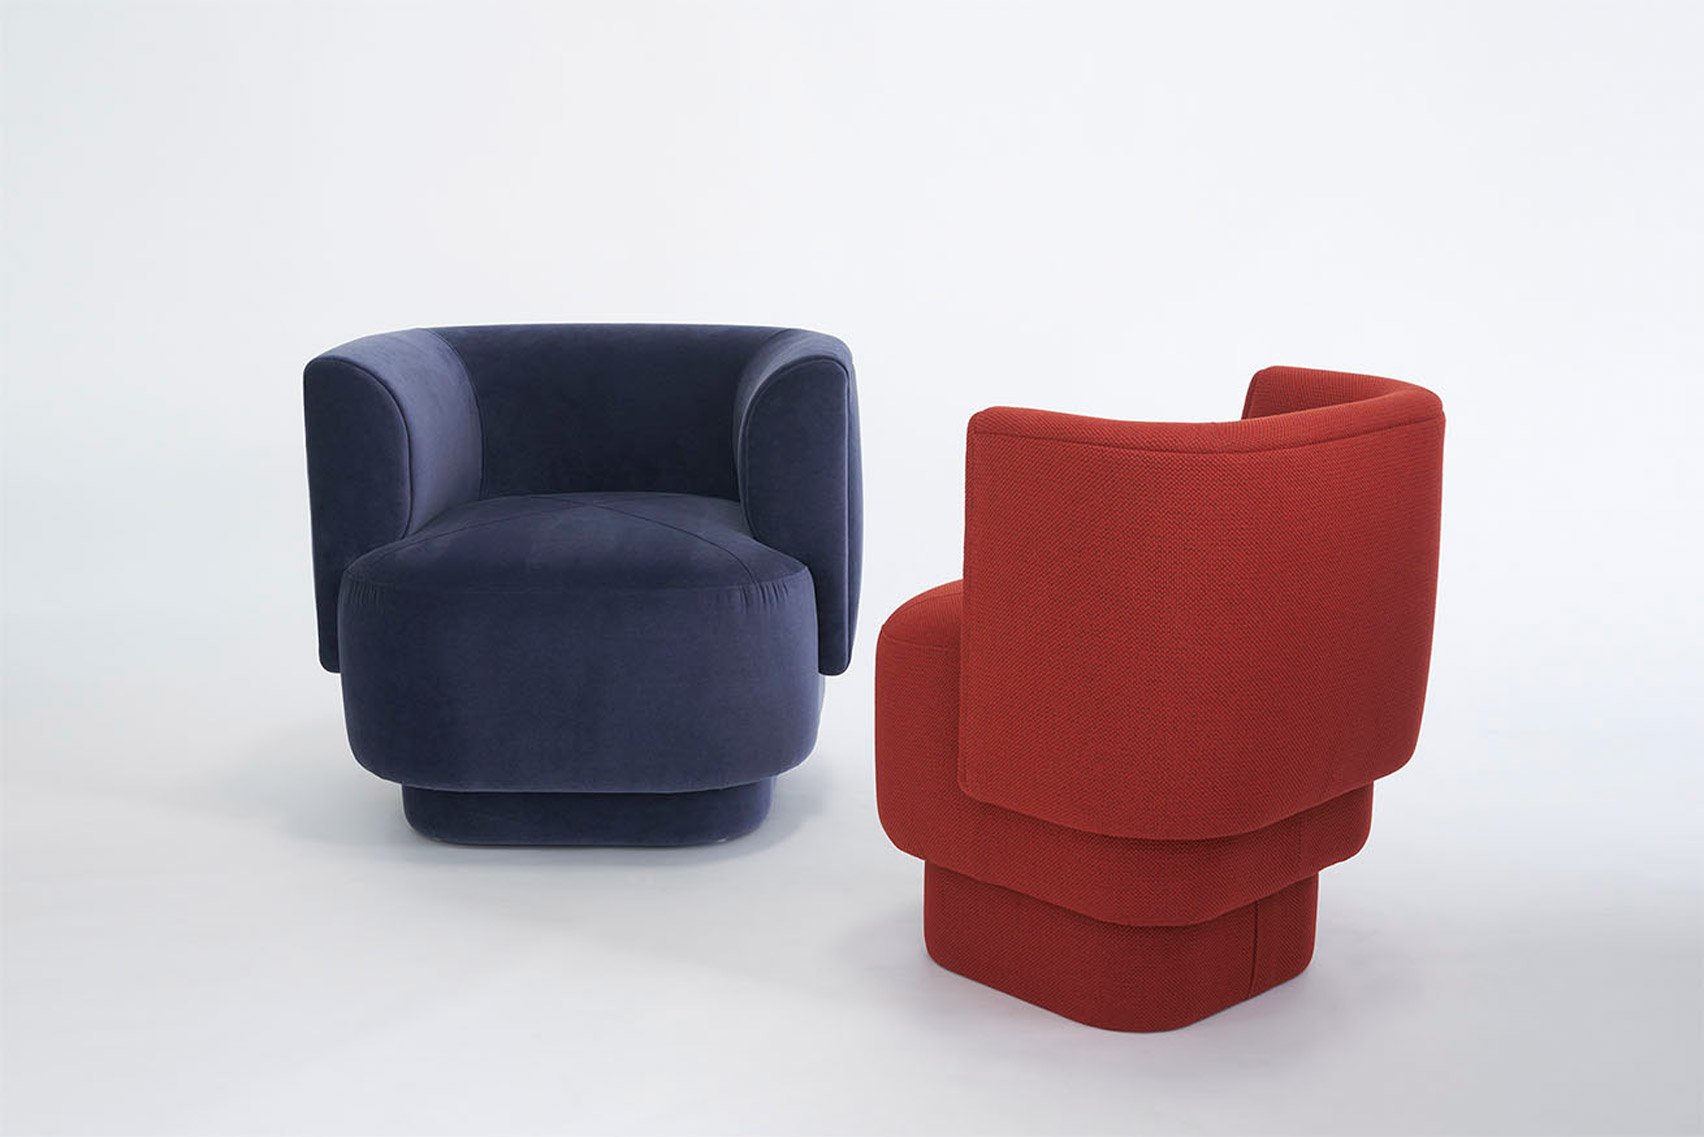 Capper upholstered lounge chairs